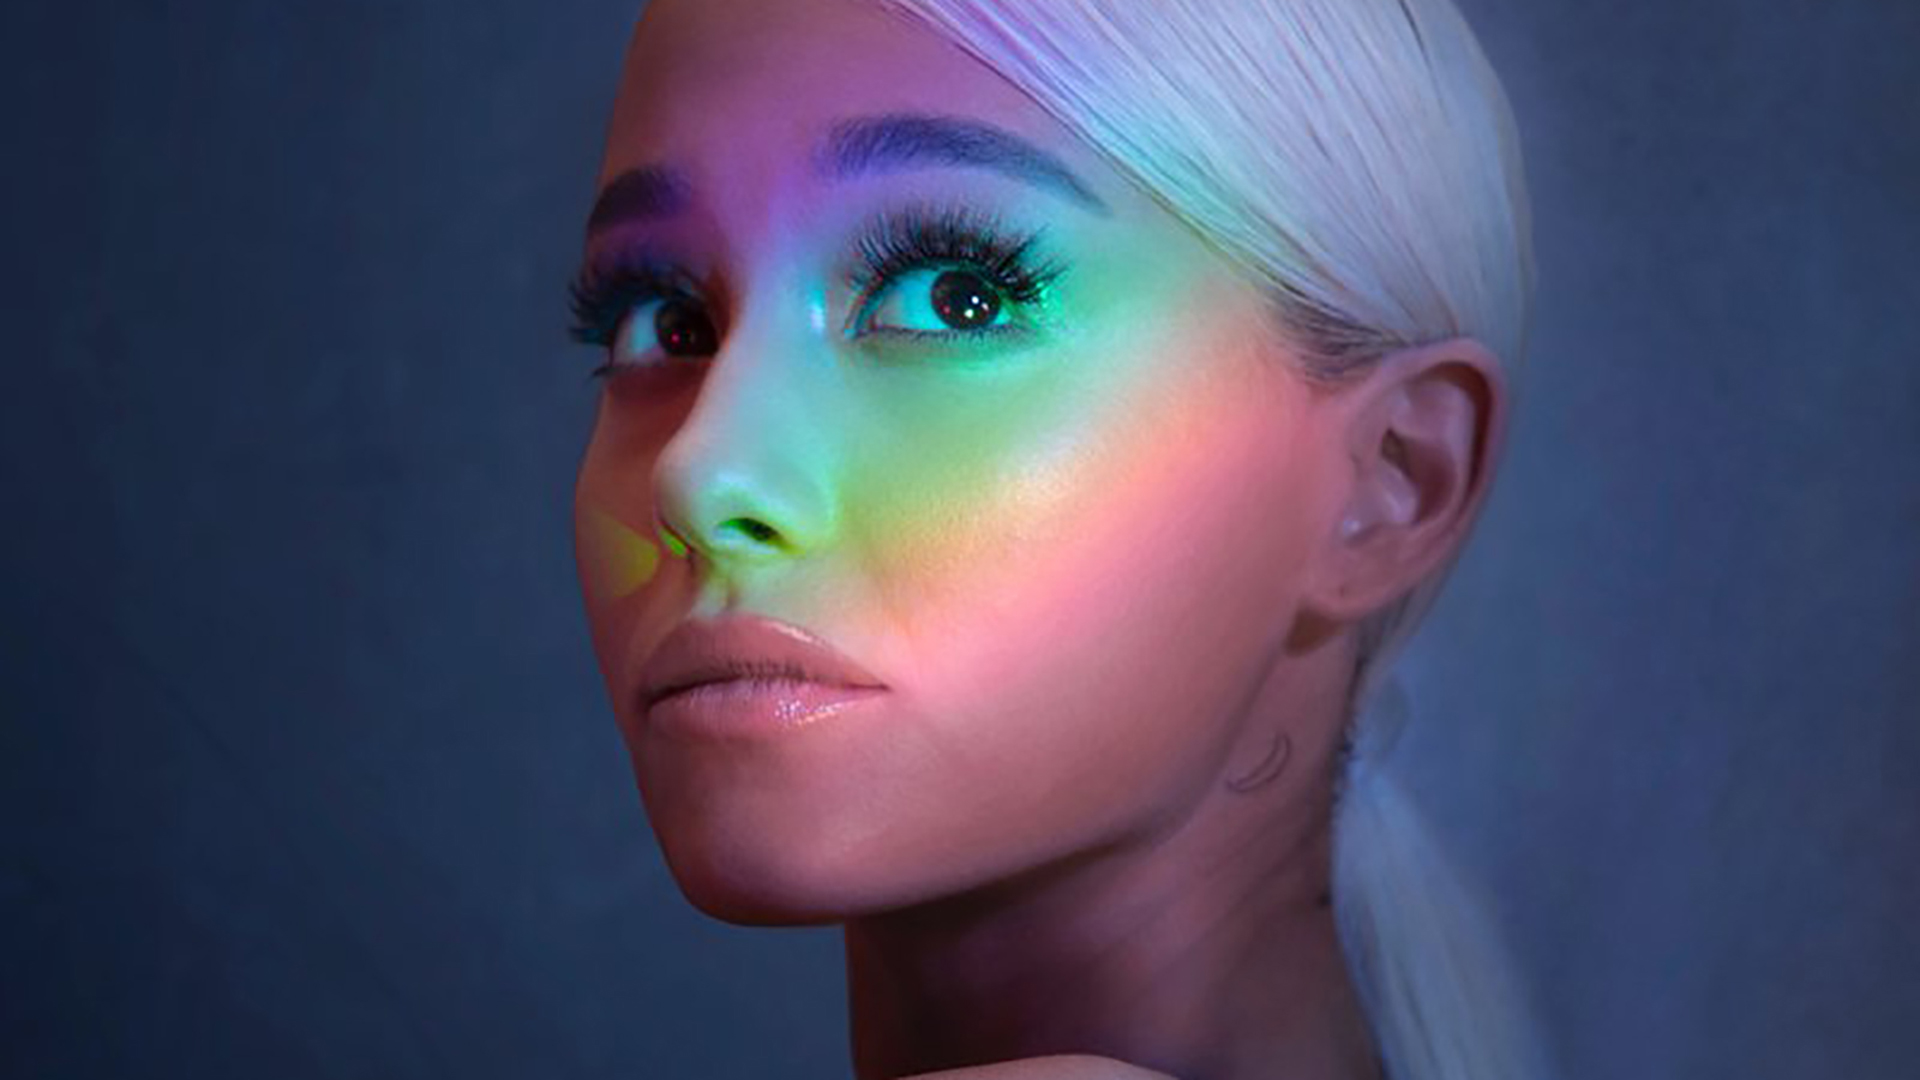 June 26, 1993: Actress and Singer Ariana Grande Was Born